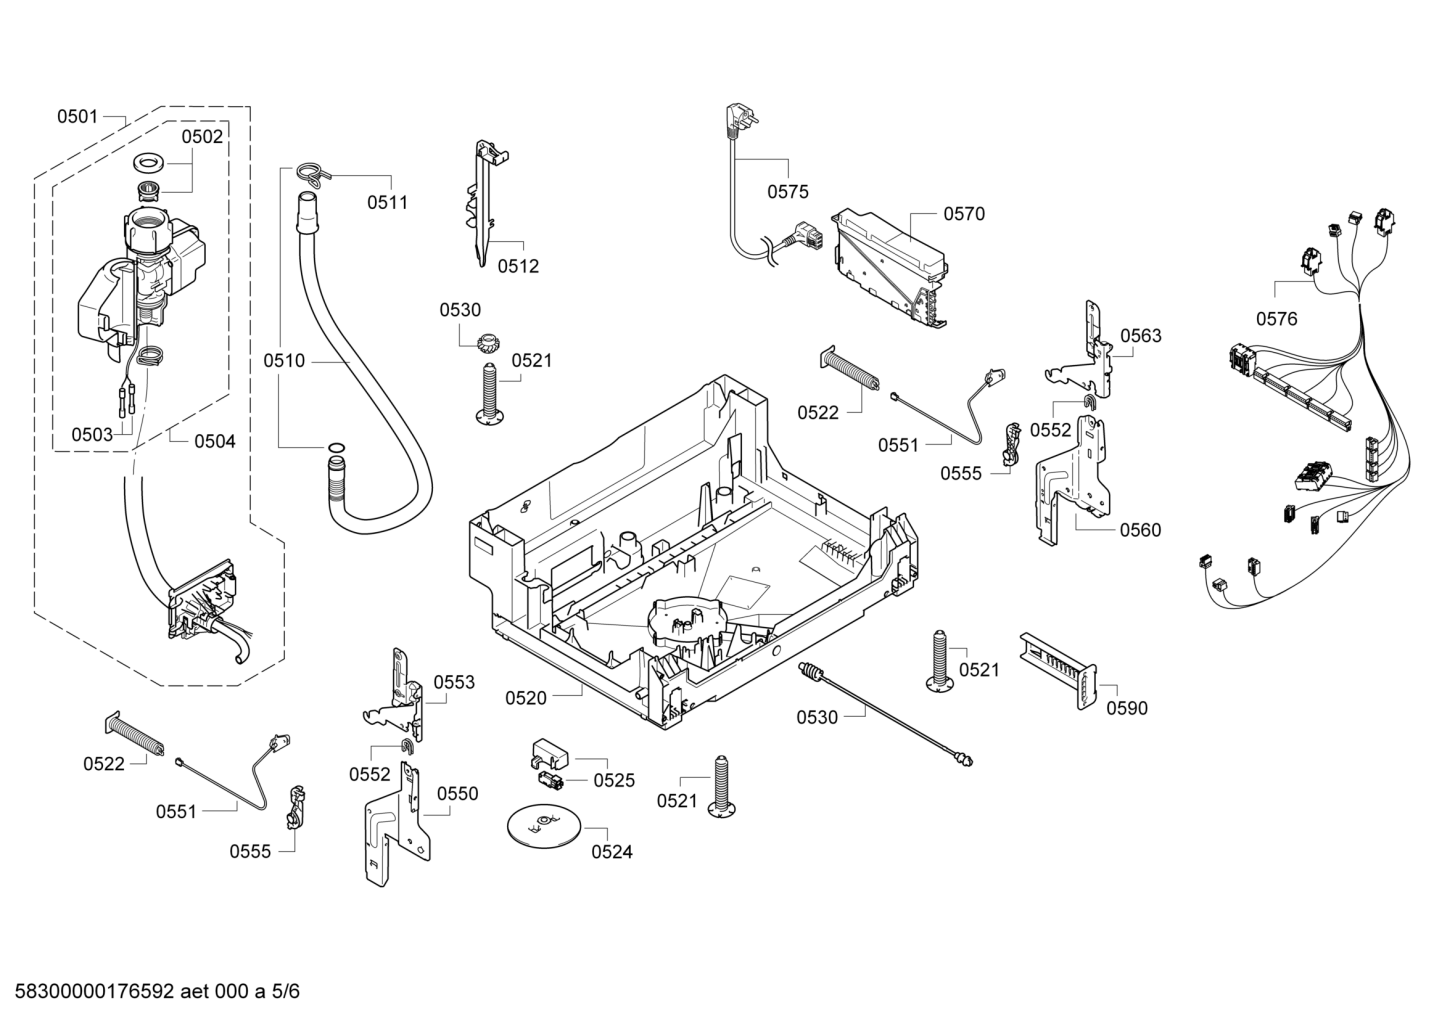 drawing_link_5_device_1647432